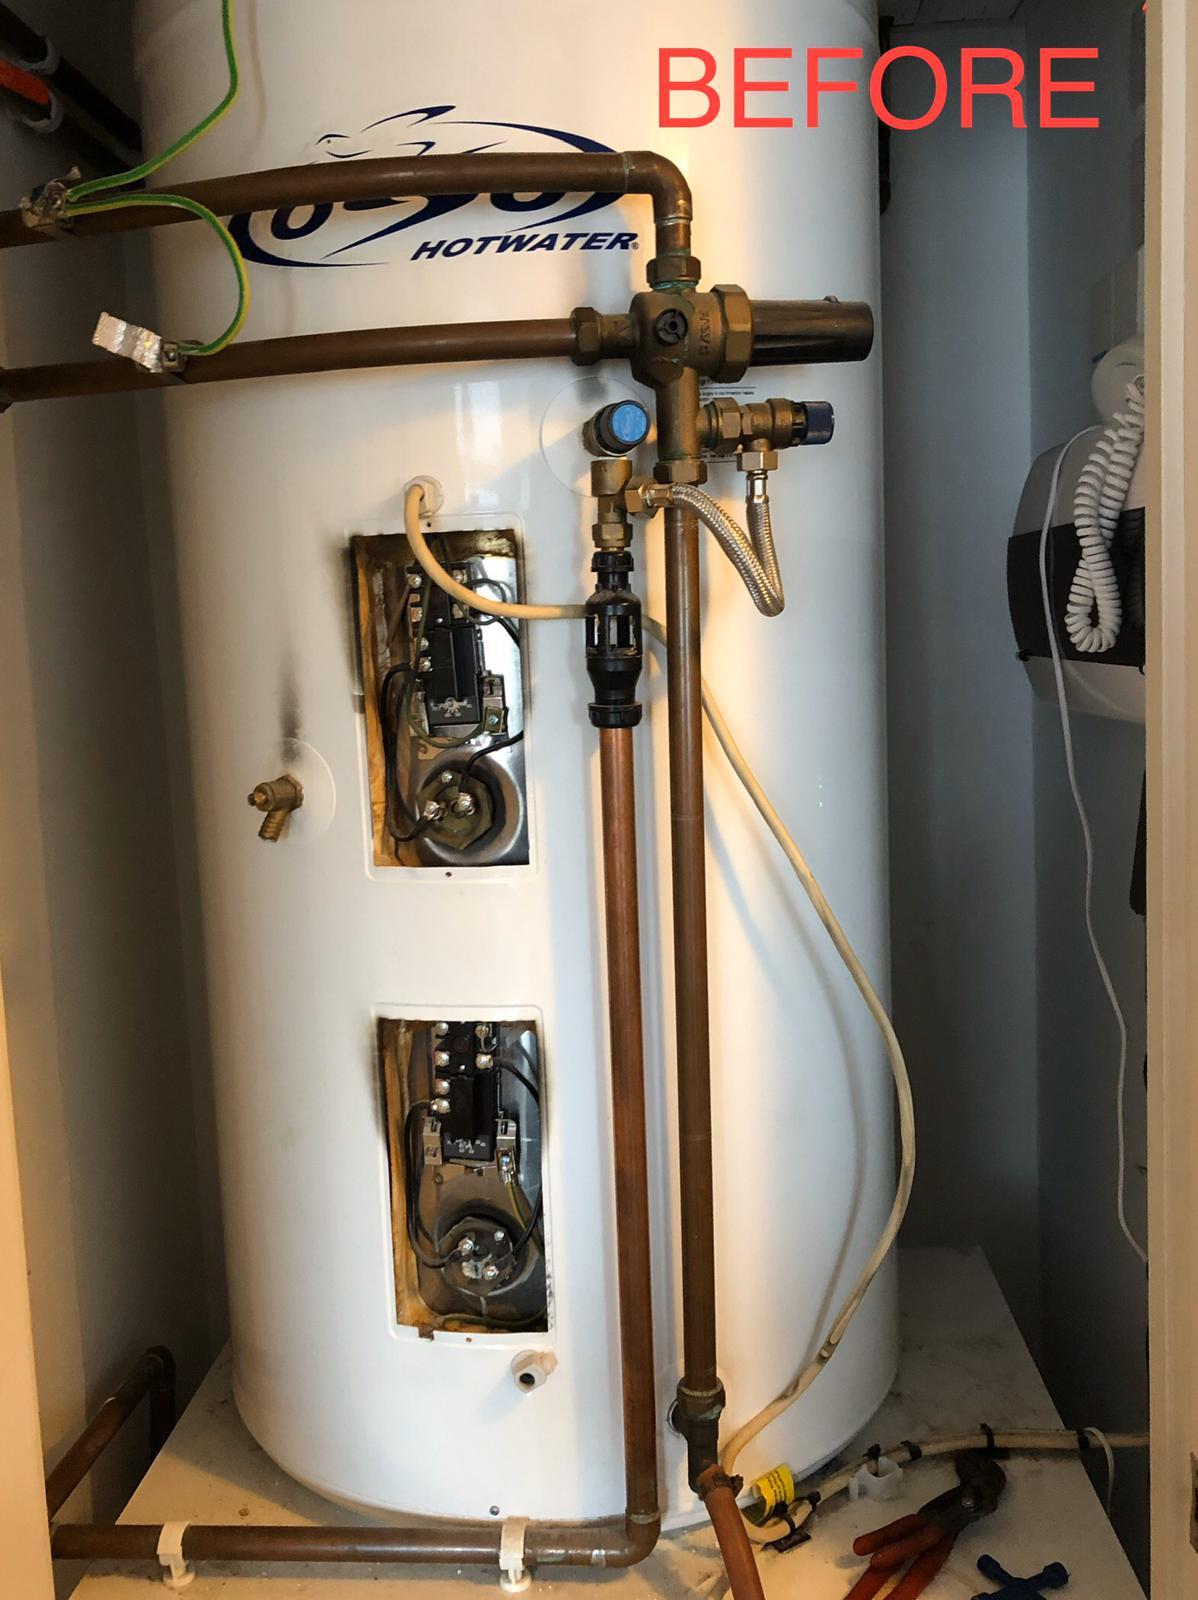 Faulty unvented cylinder causing damage to property